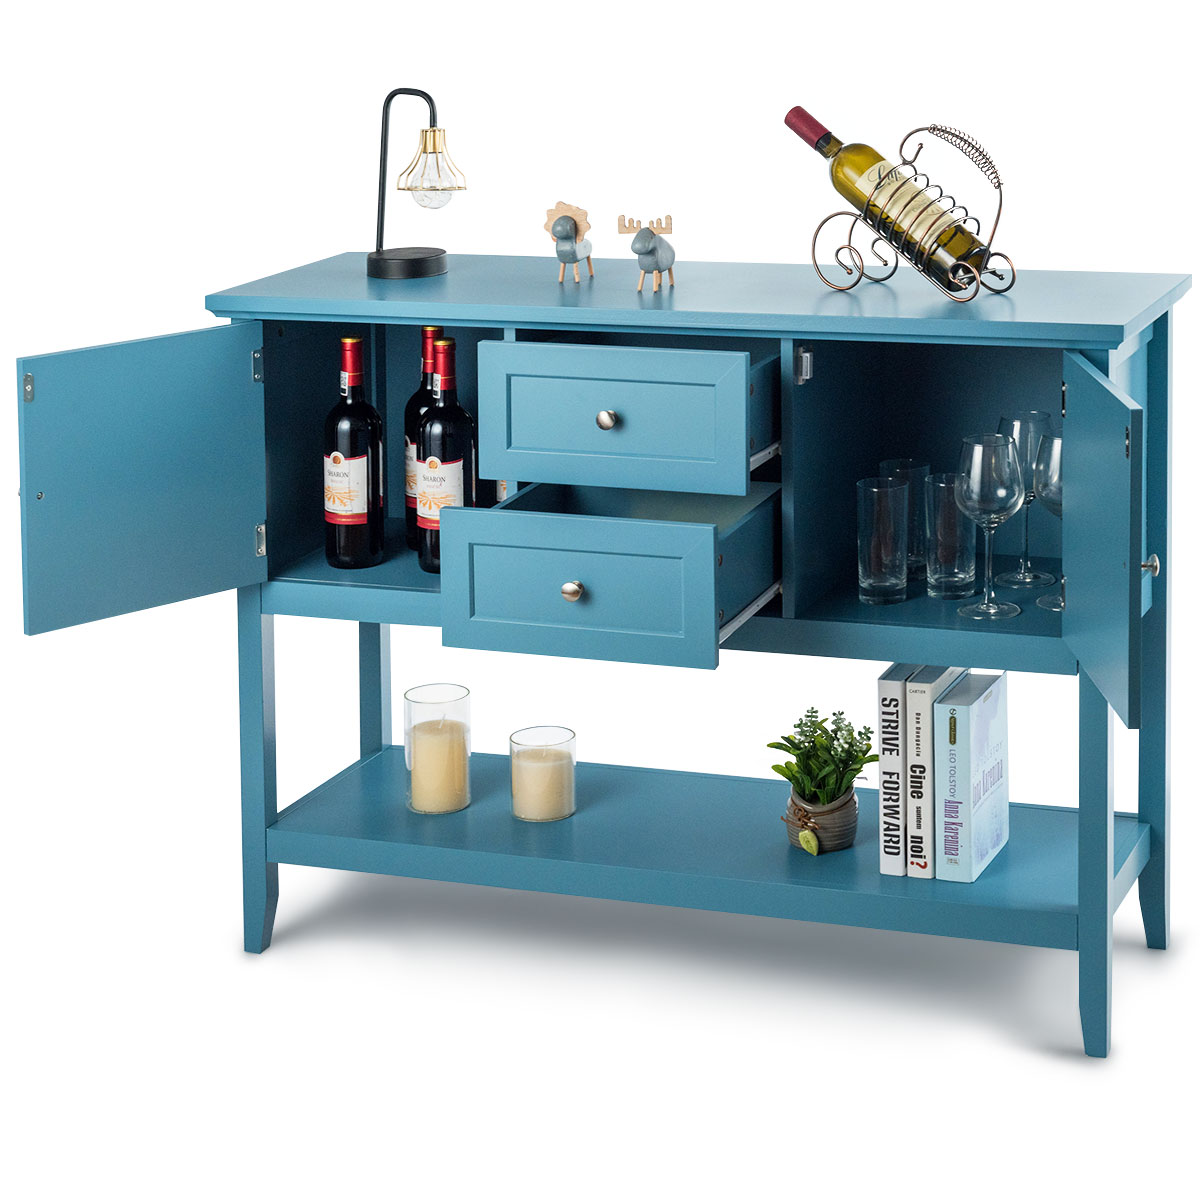 Blue Wooden Sideboard with Drawers & Storage Cabinets